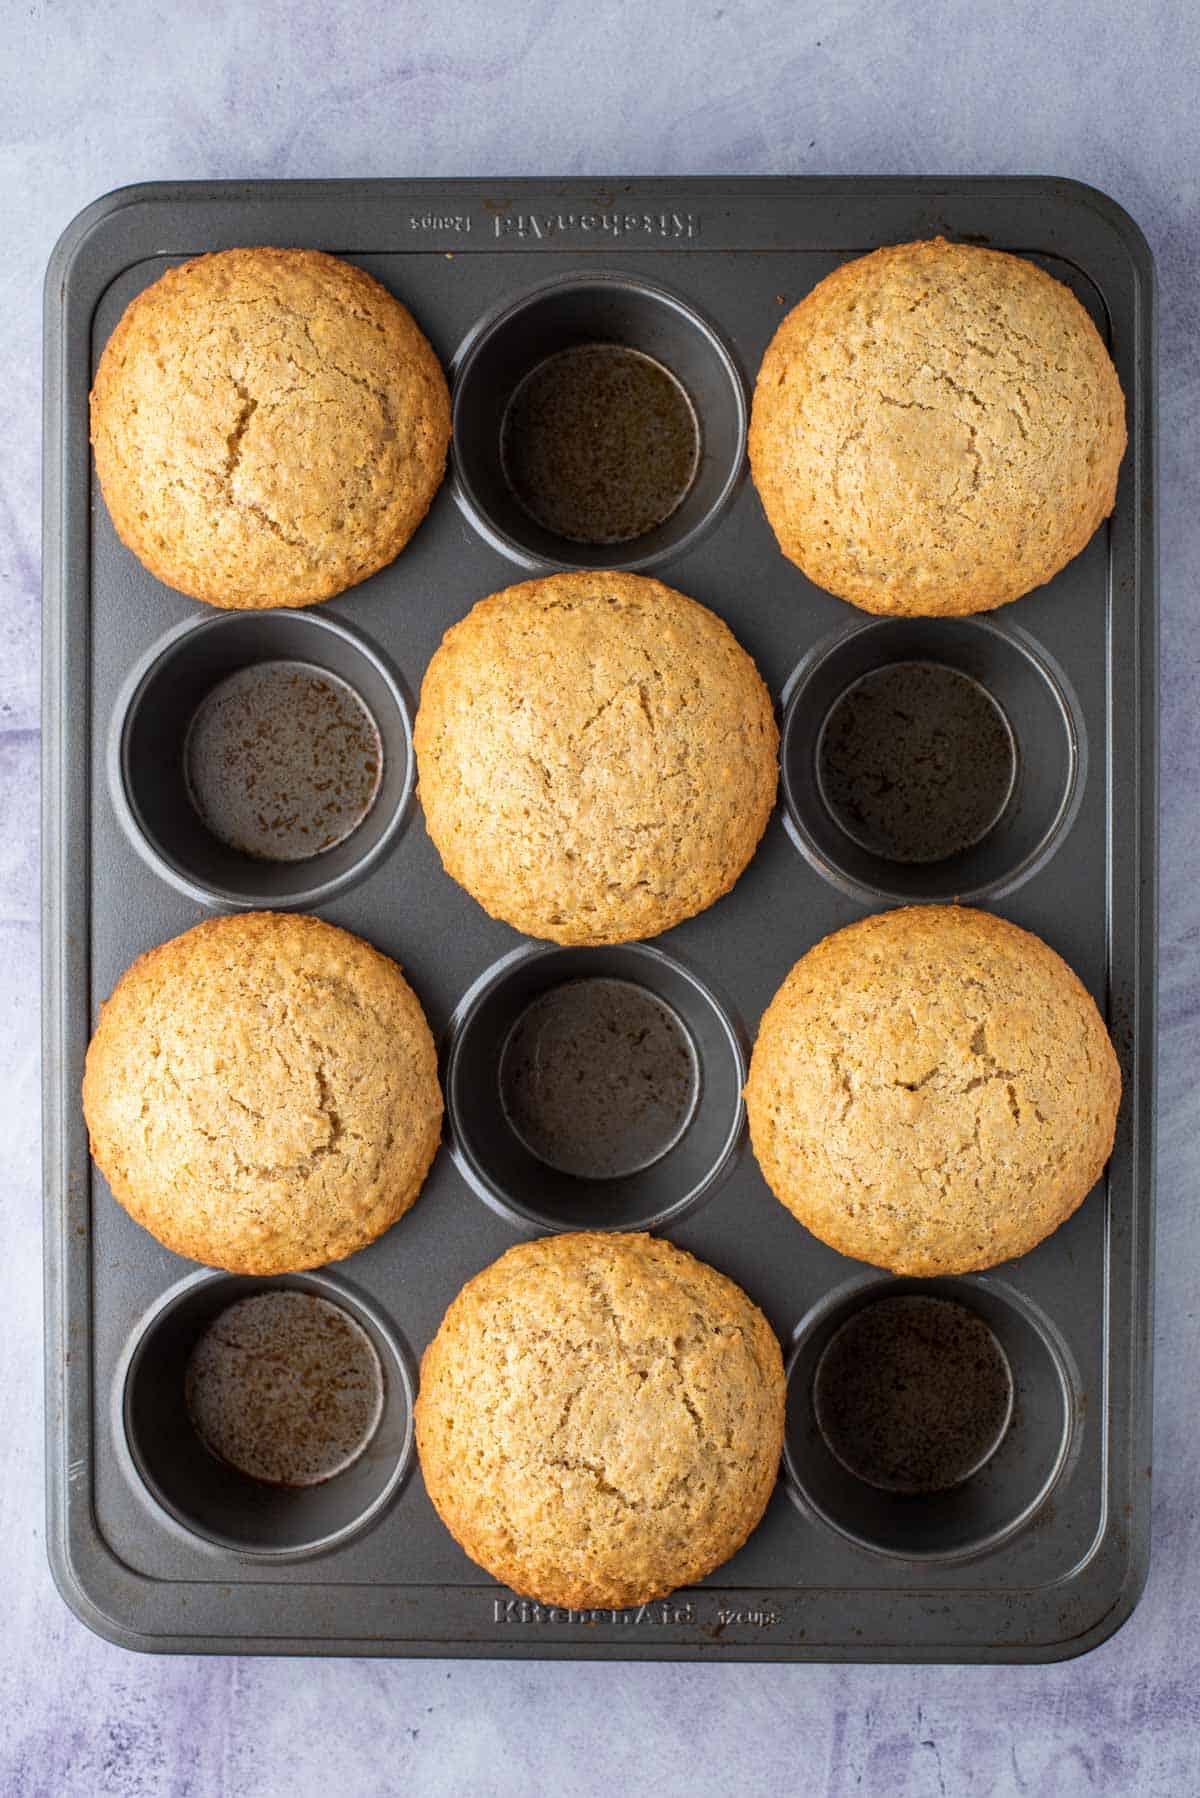 a muffin pan with a bakery style bran muffin in every other muffin spot